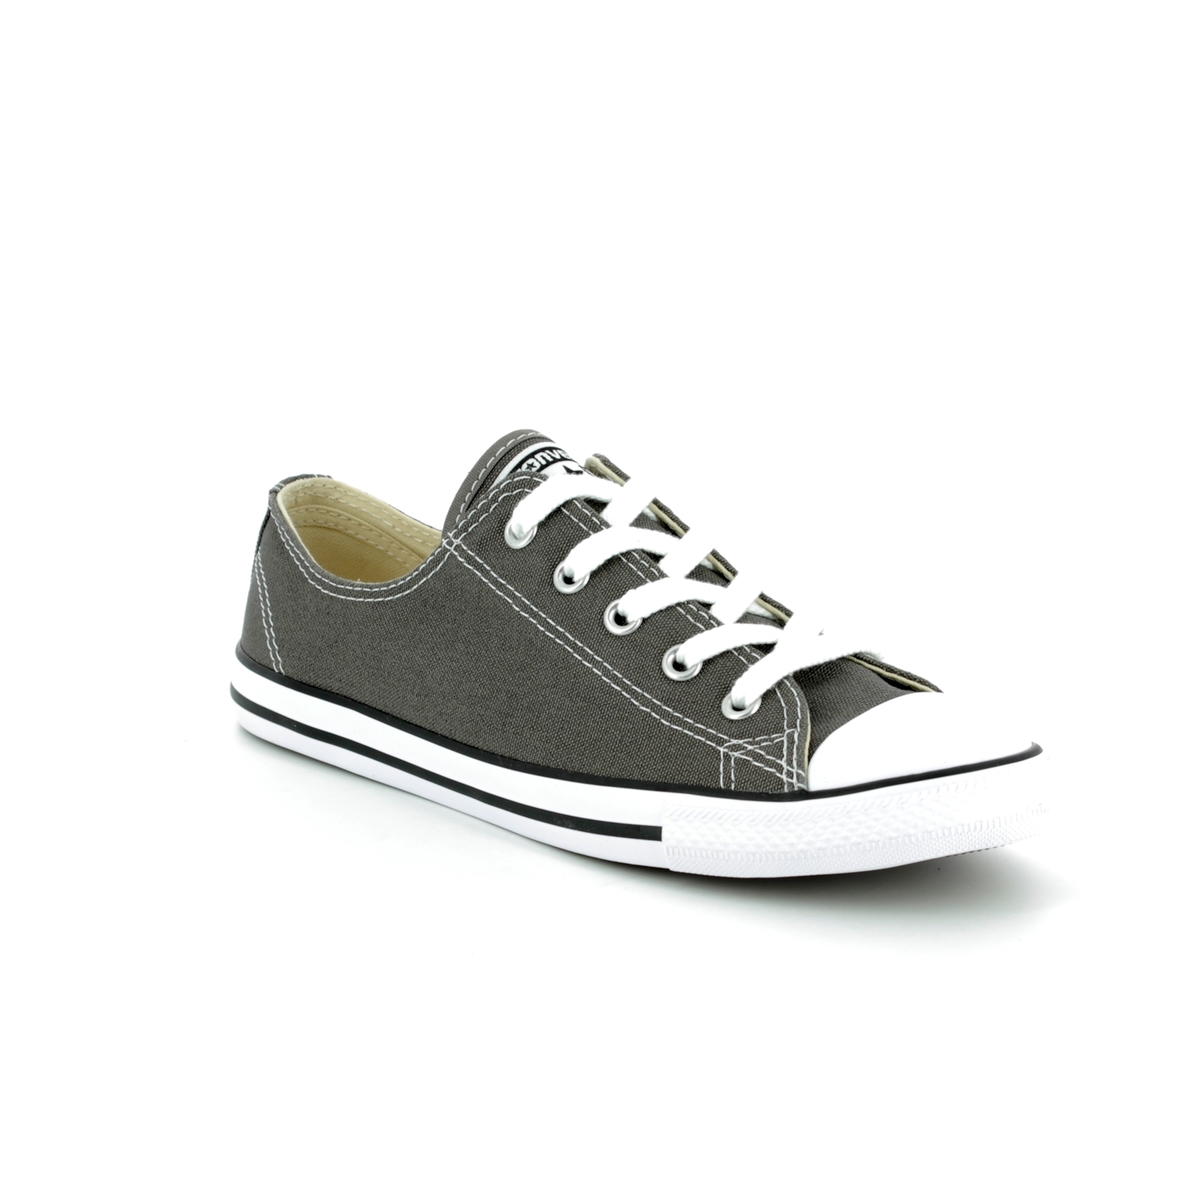 converse dainty ox charcoal